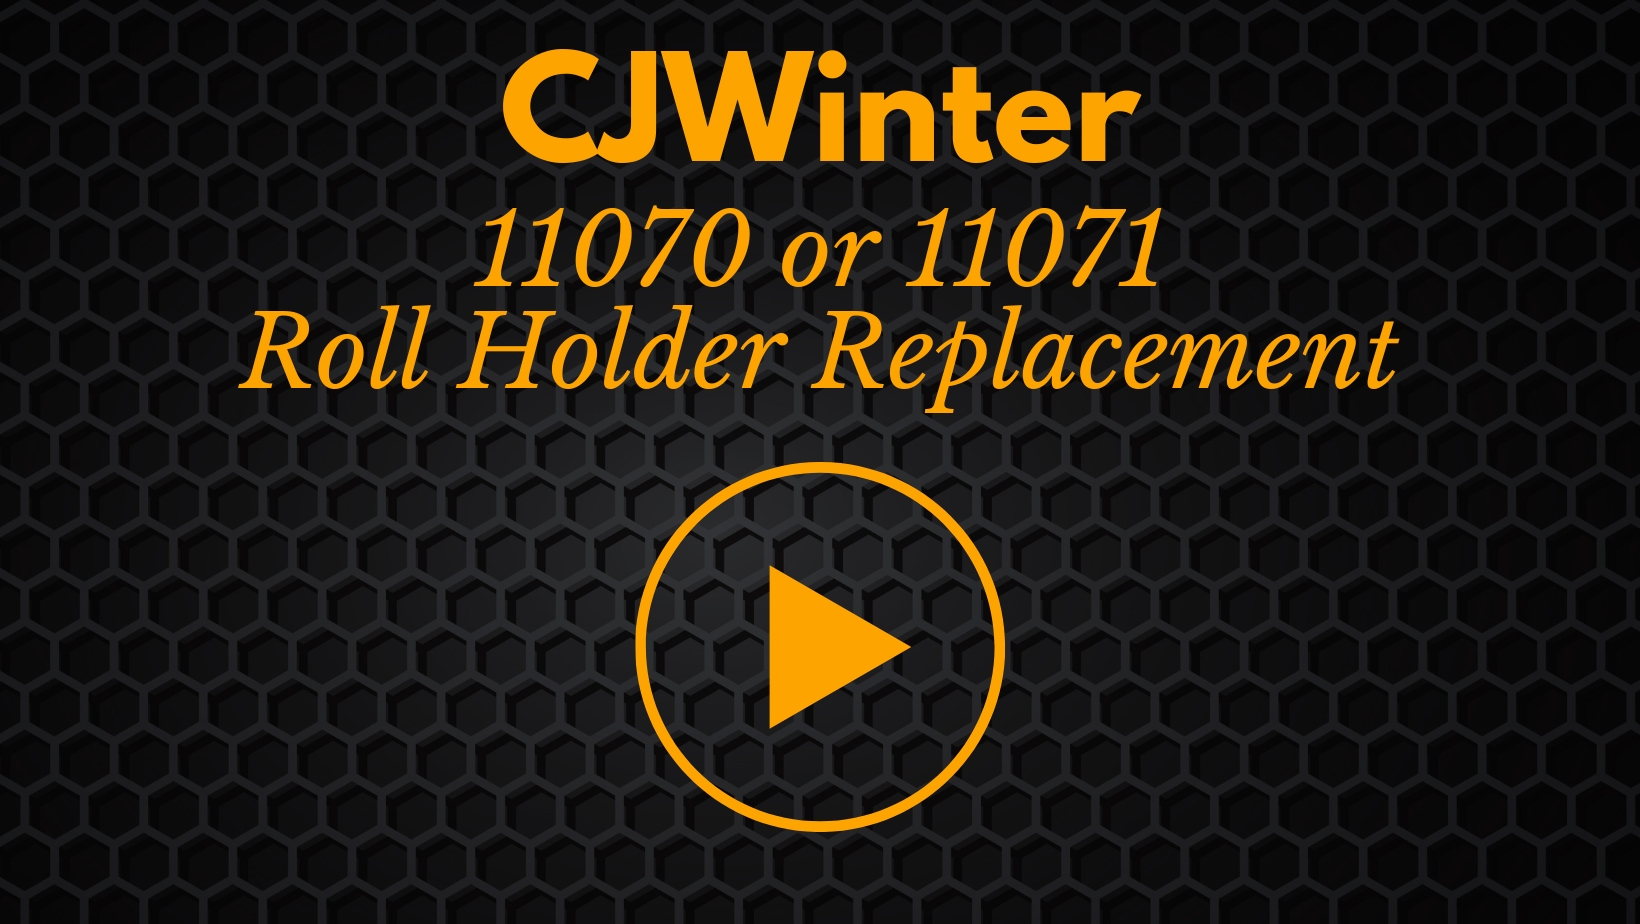 11070 or 11071 Roll Holder Replacement